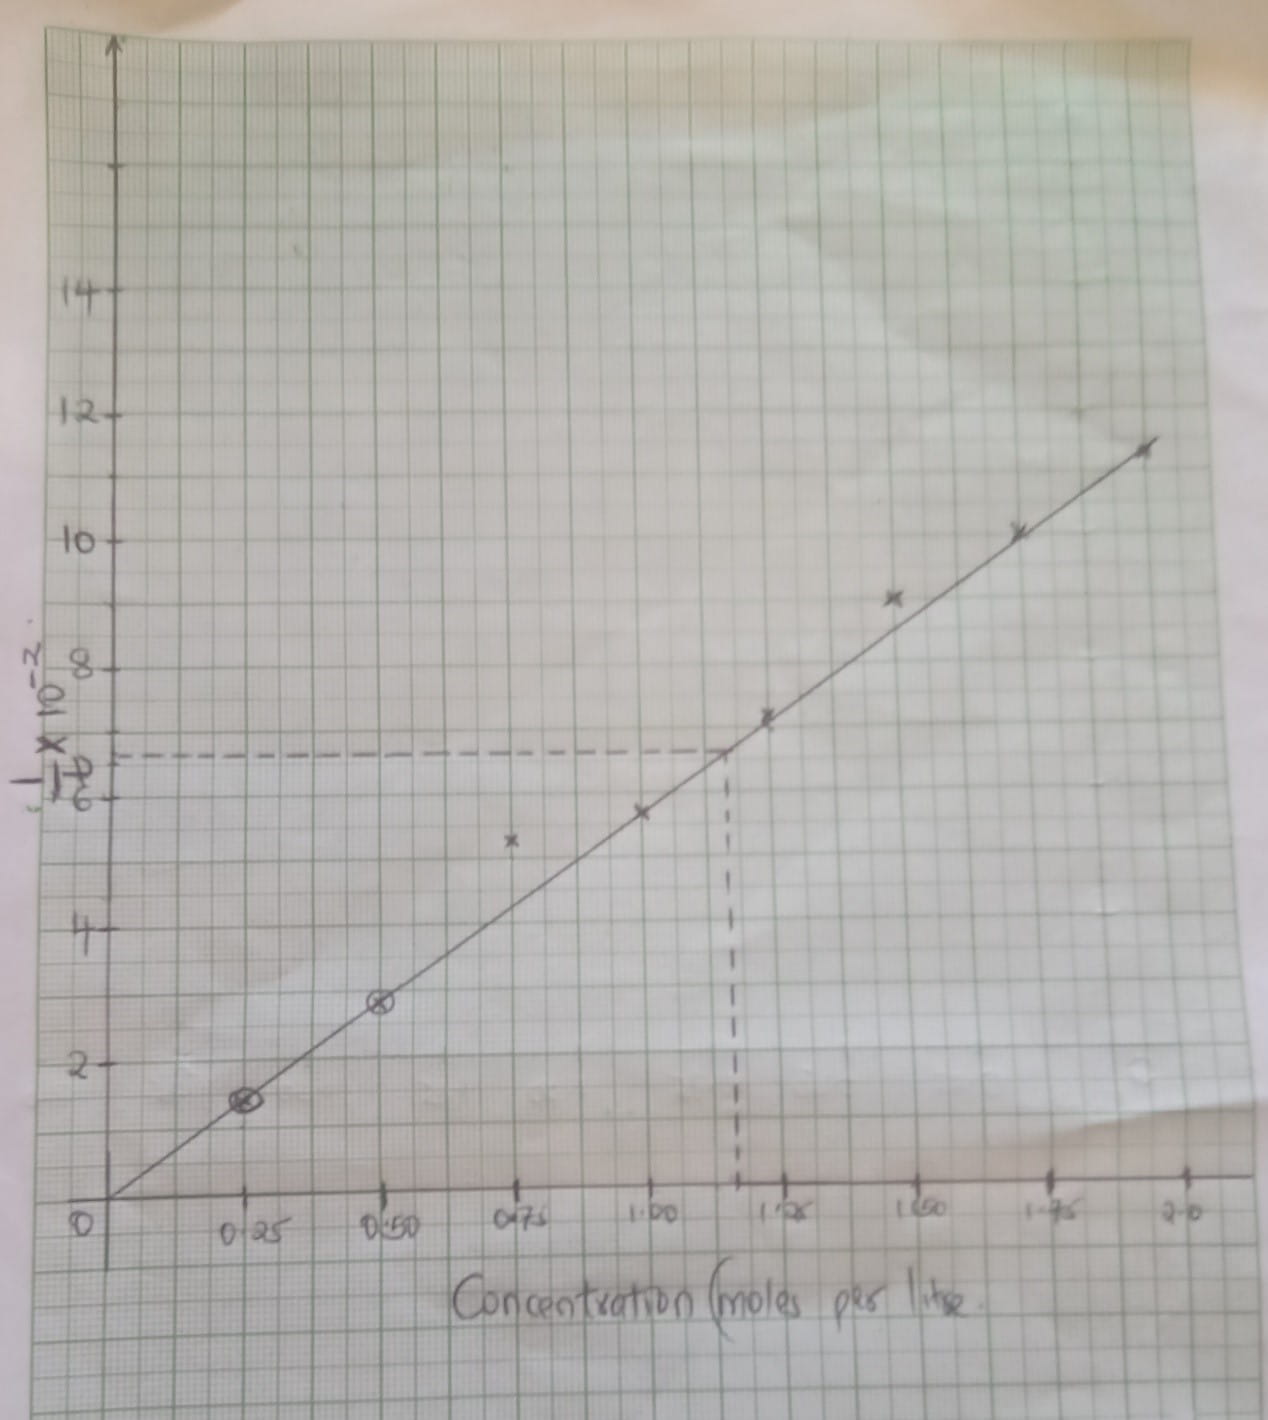 graph of inverse of time against concentration min